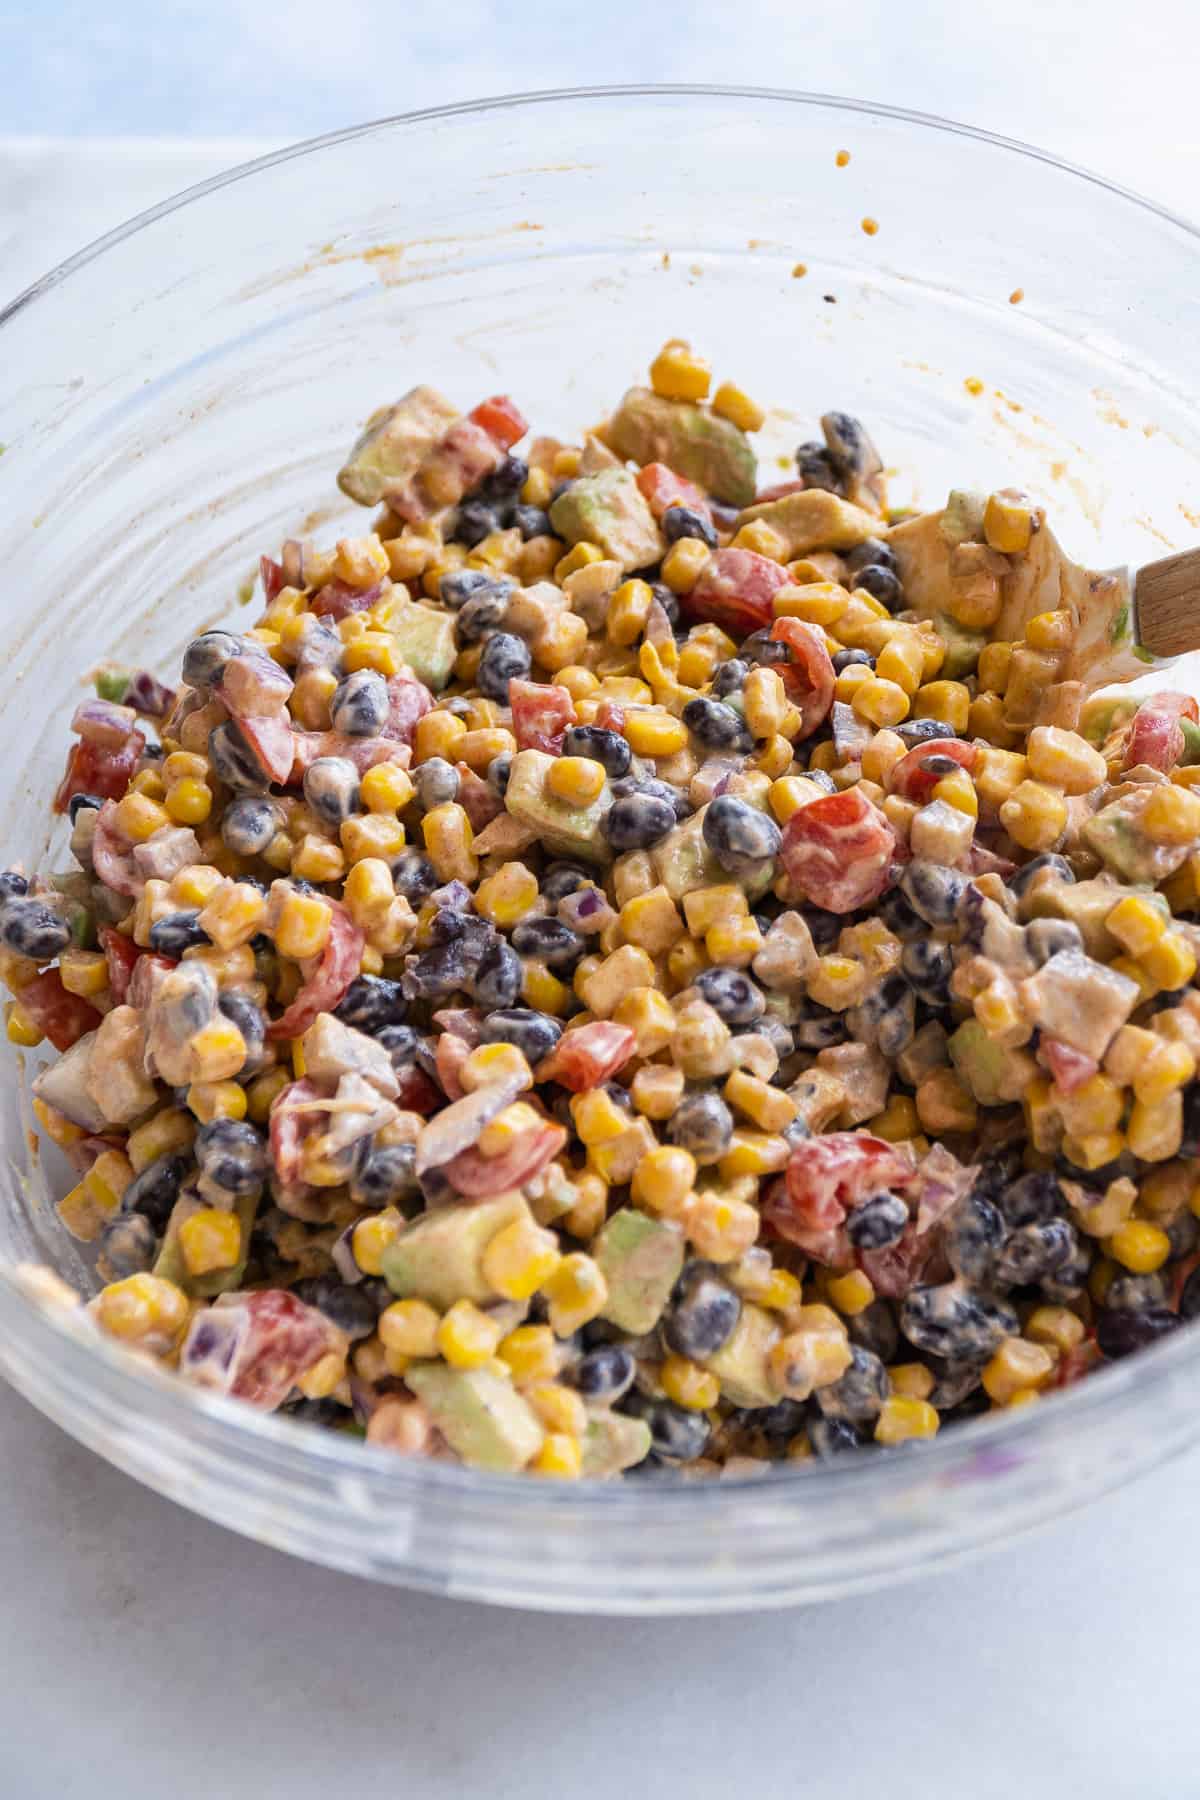 Creamy mexican corn salad tossed in the yogurt sauce in a clear bowl.